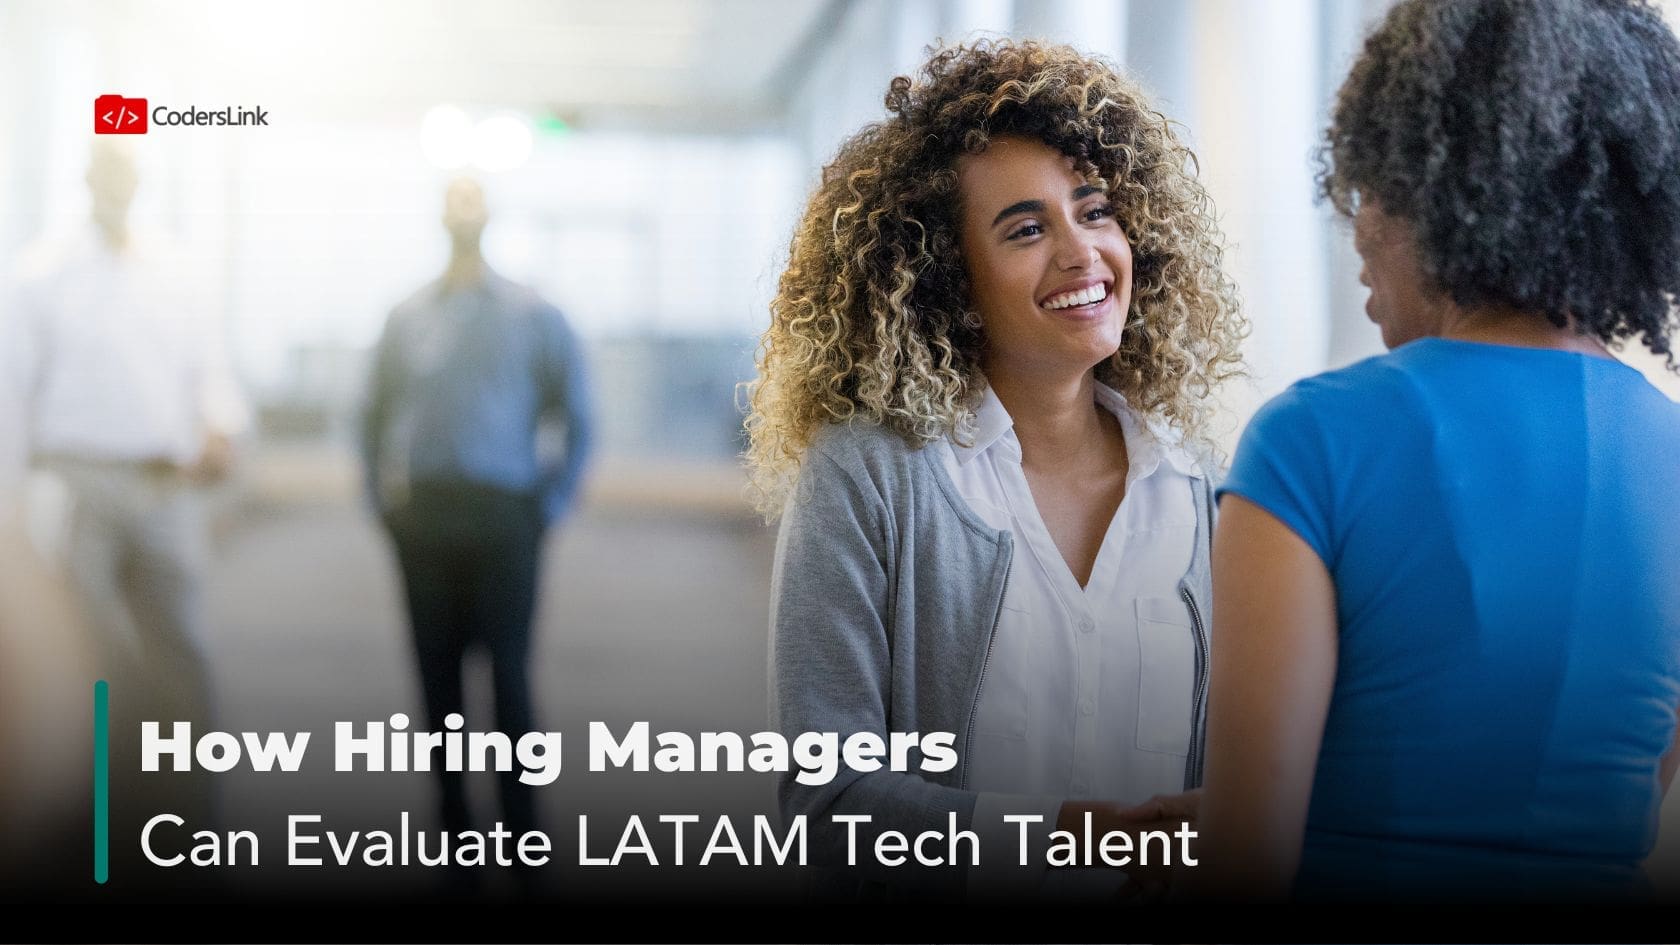 How Hiring Managers Can Evaluate LATAM Tech Talent